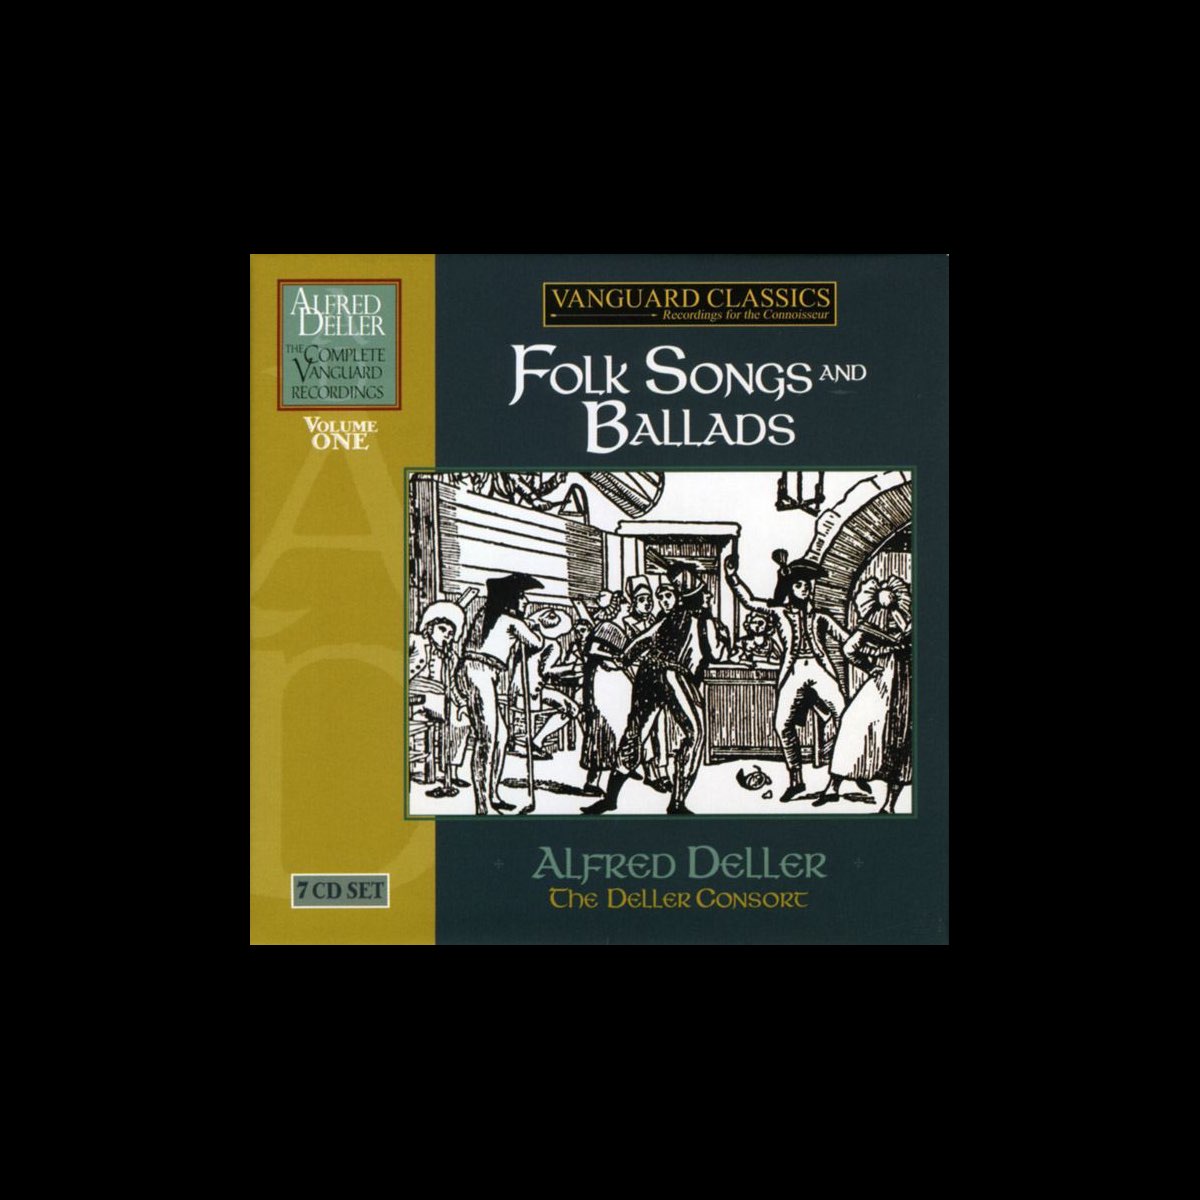 Folk Songs and Ballads by Alfred Deller & The Deller Consort on Apple Music